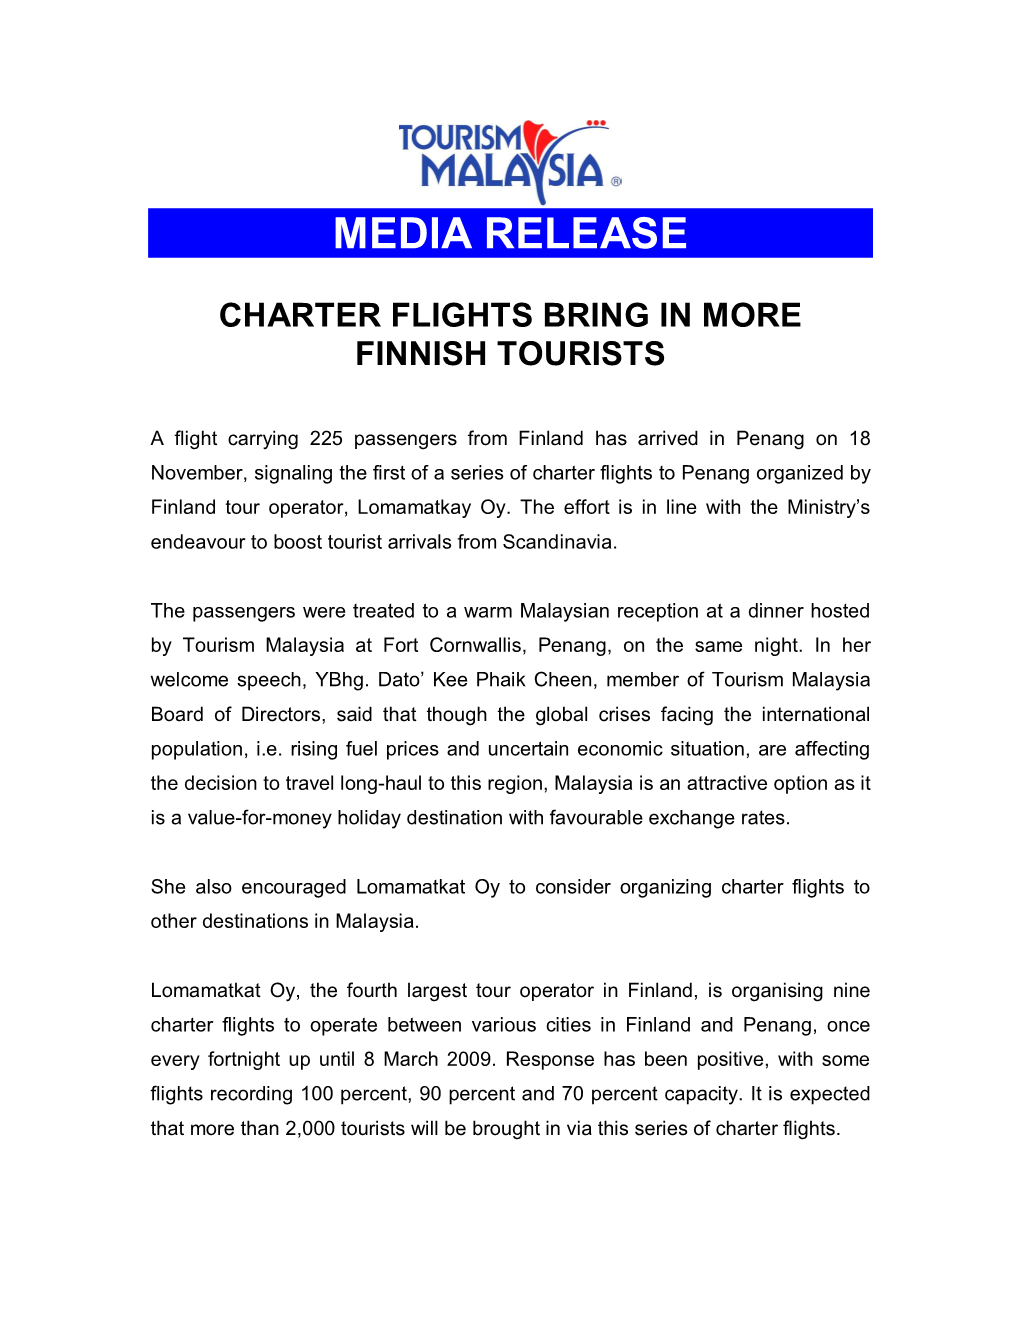 Media Release Charter Flights Bring in More Finnish Tourists